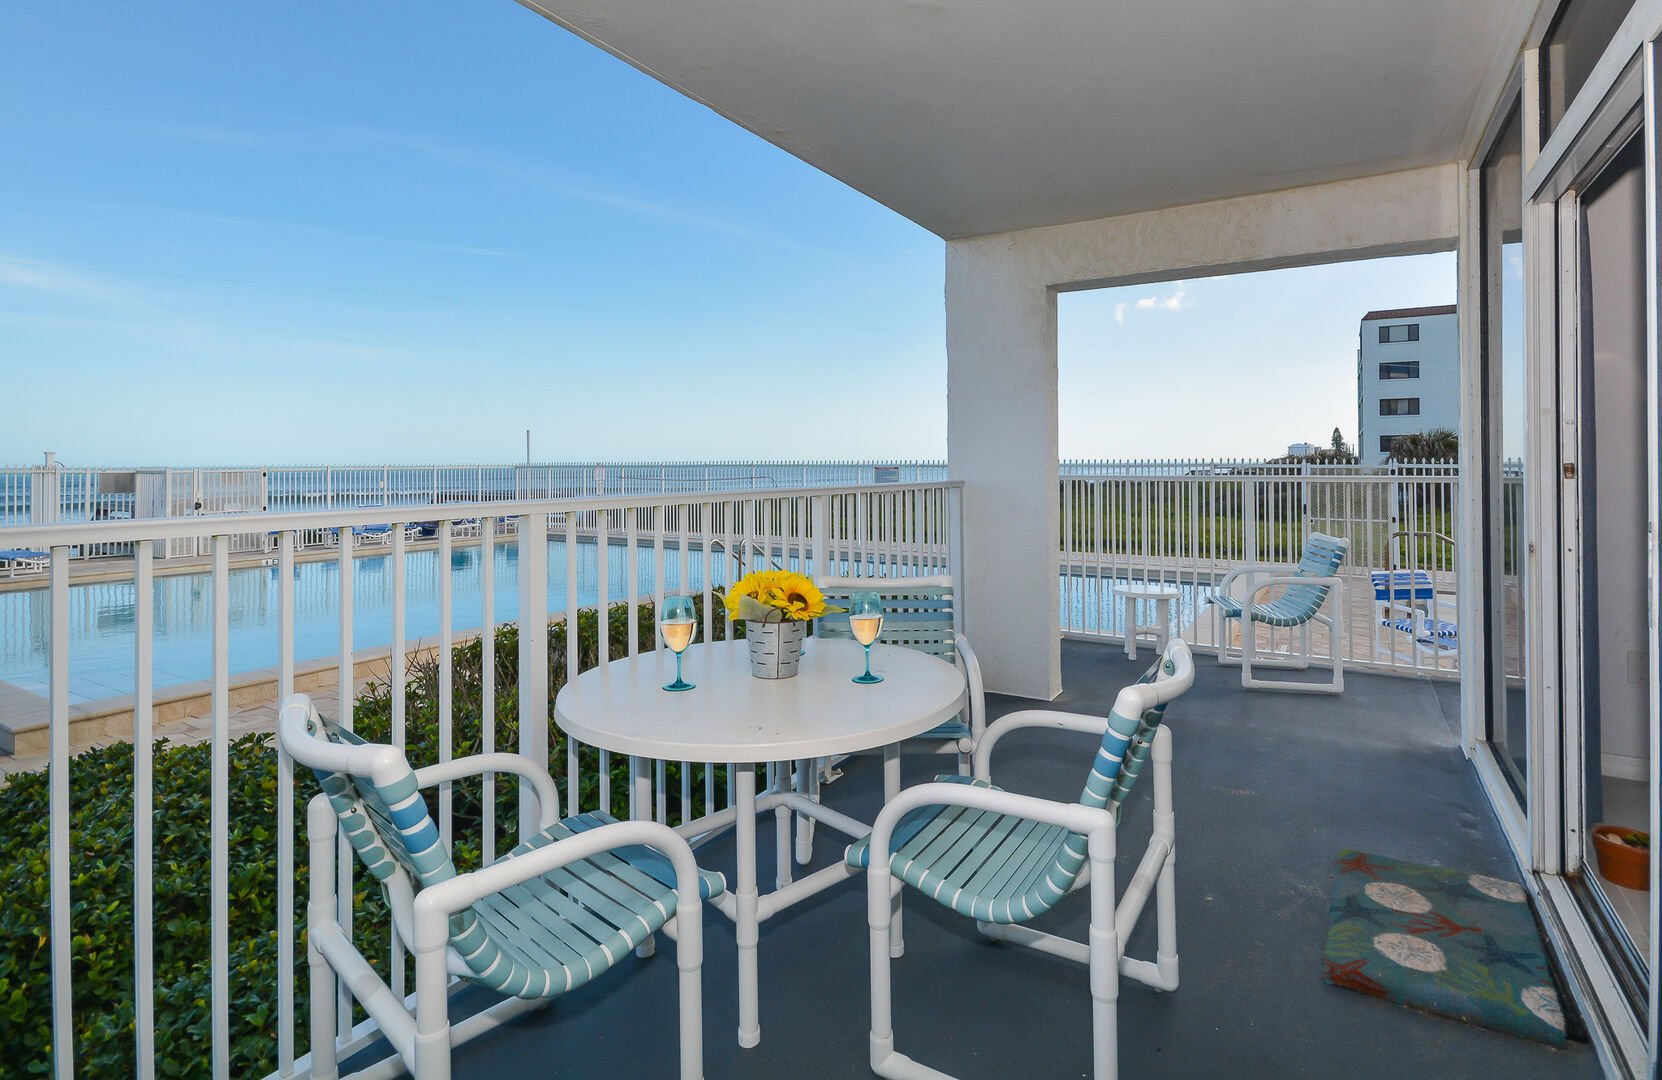 Escape the sun and relax on the oceanfront patio overlooking the pool area.